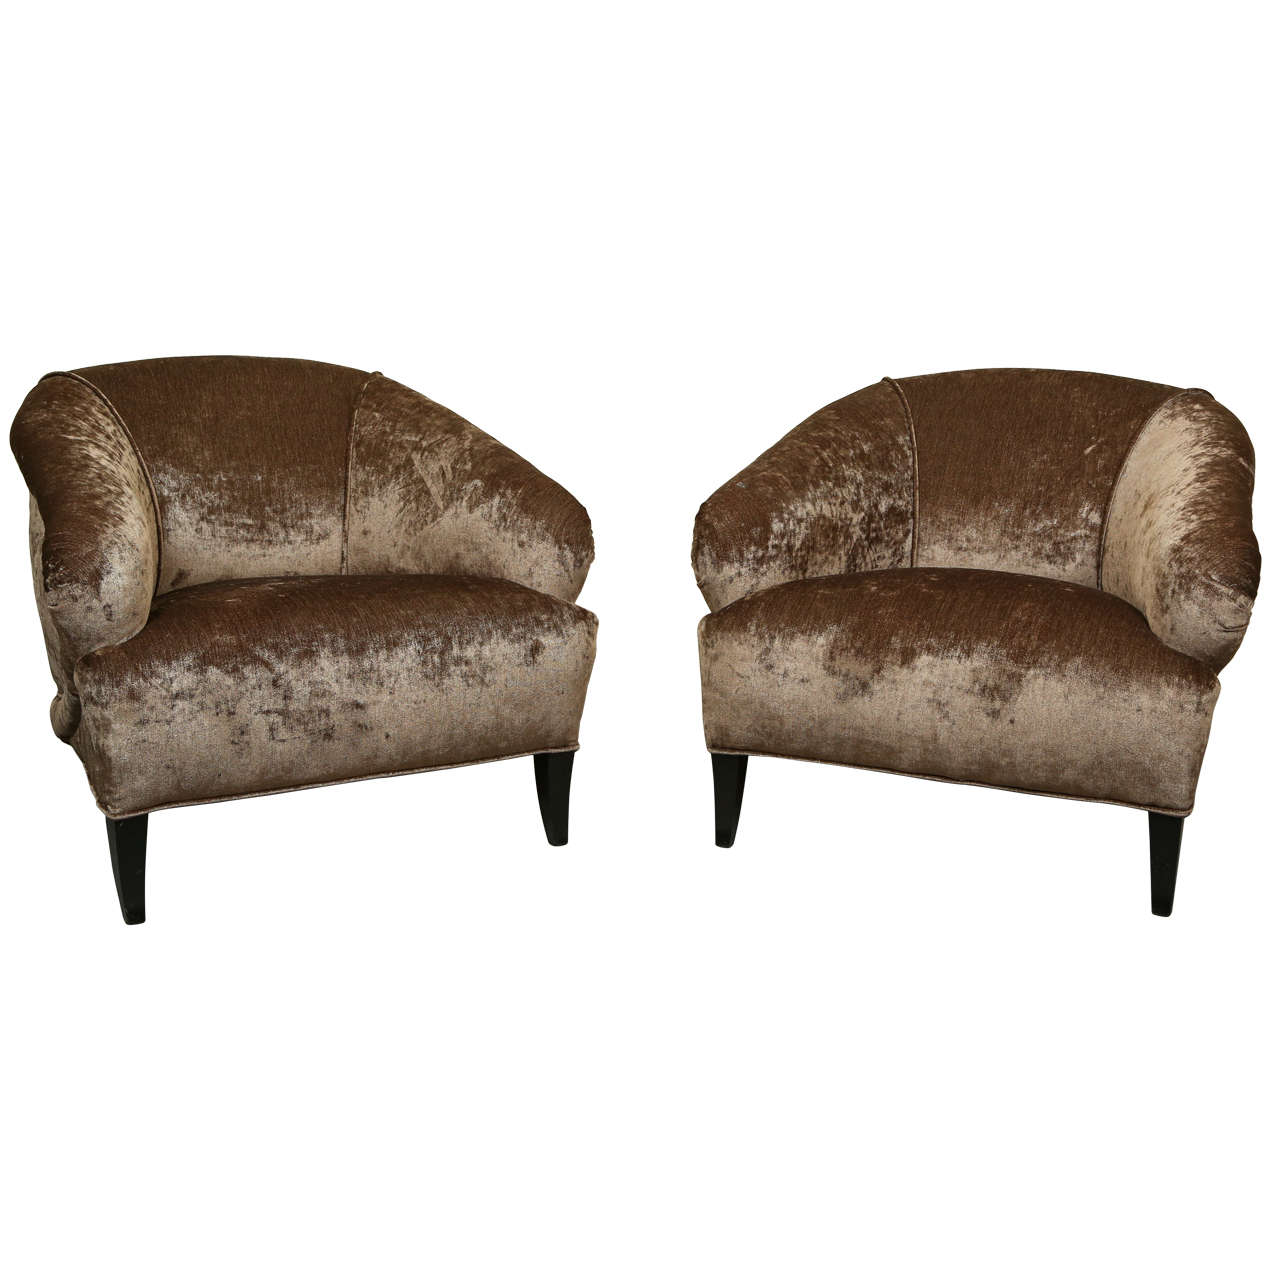 Pair of Club Chairs by James Mont